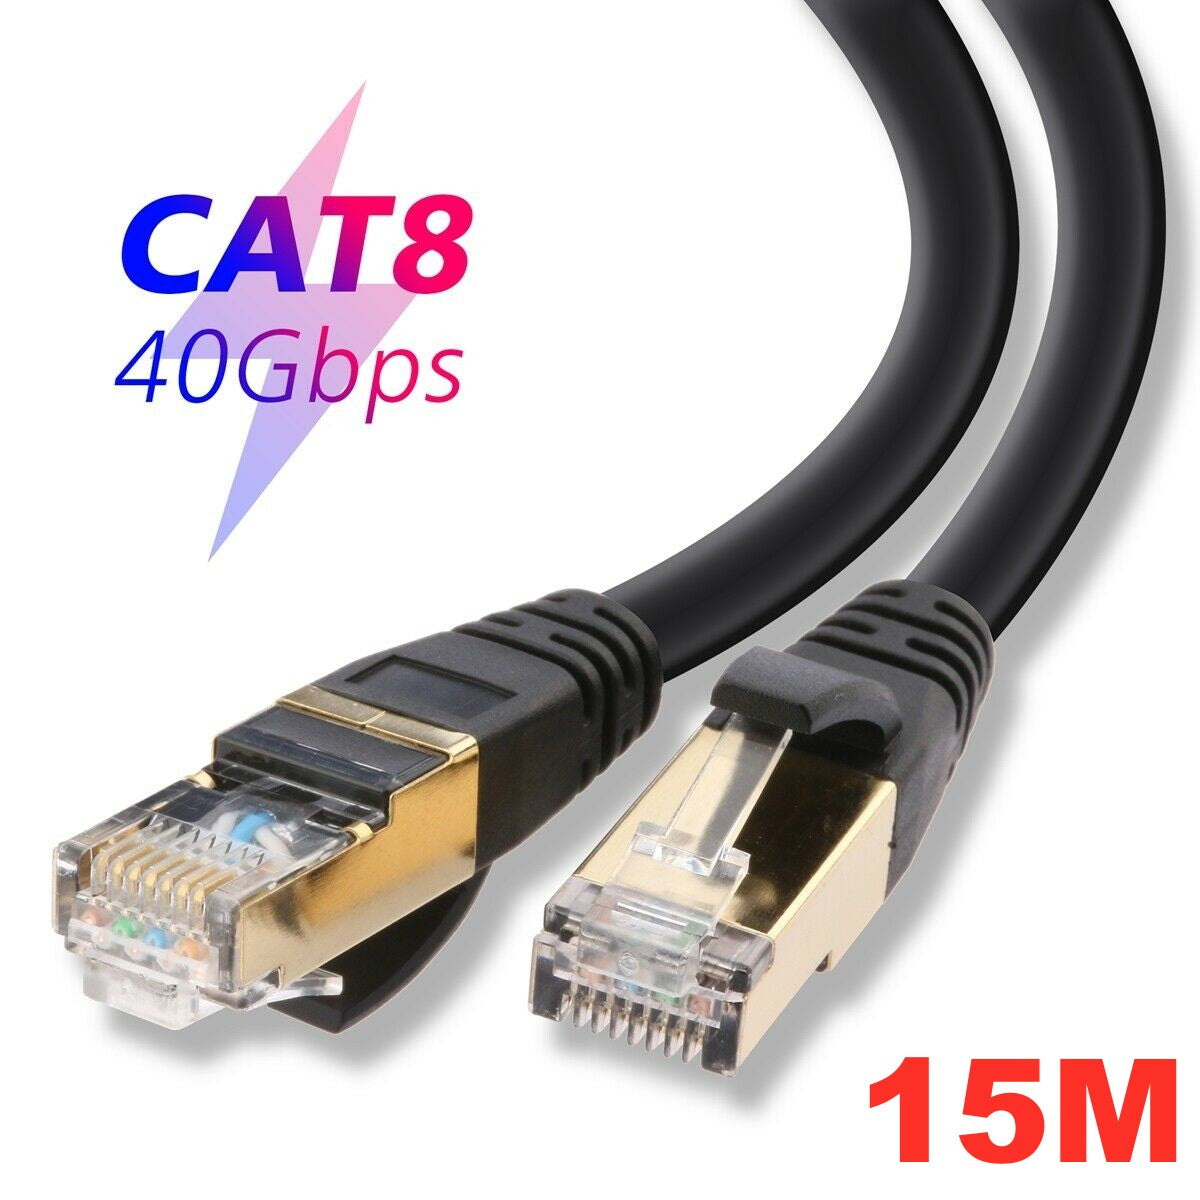 CAT8 Ethernet Network Cable